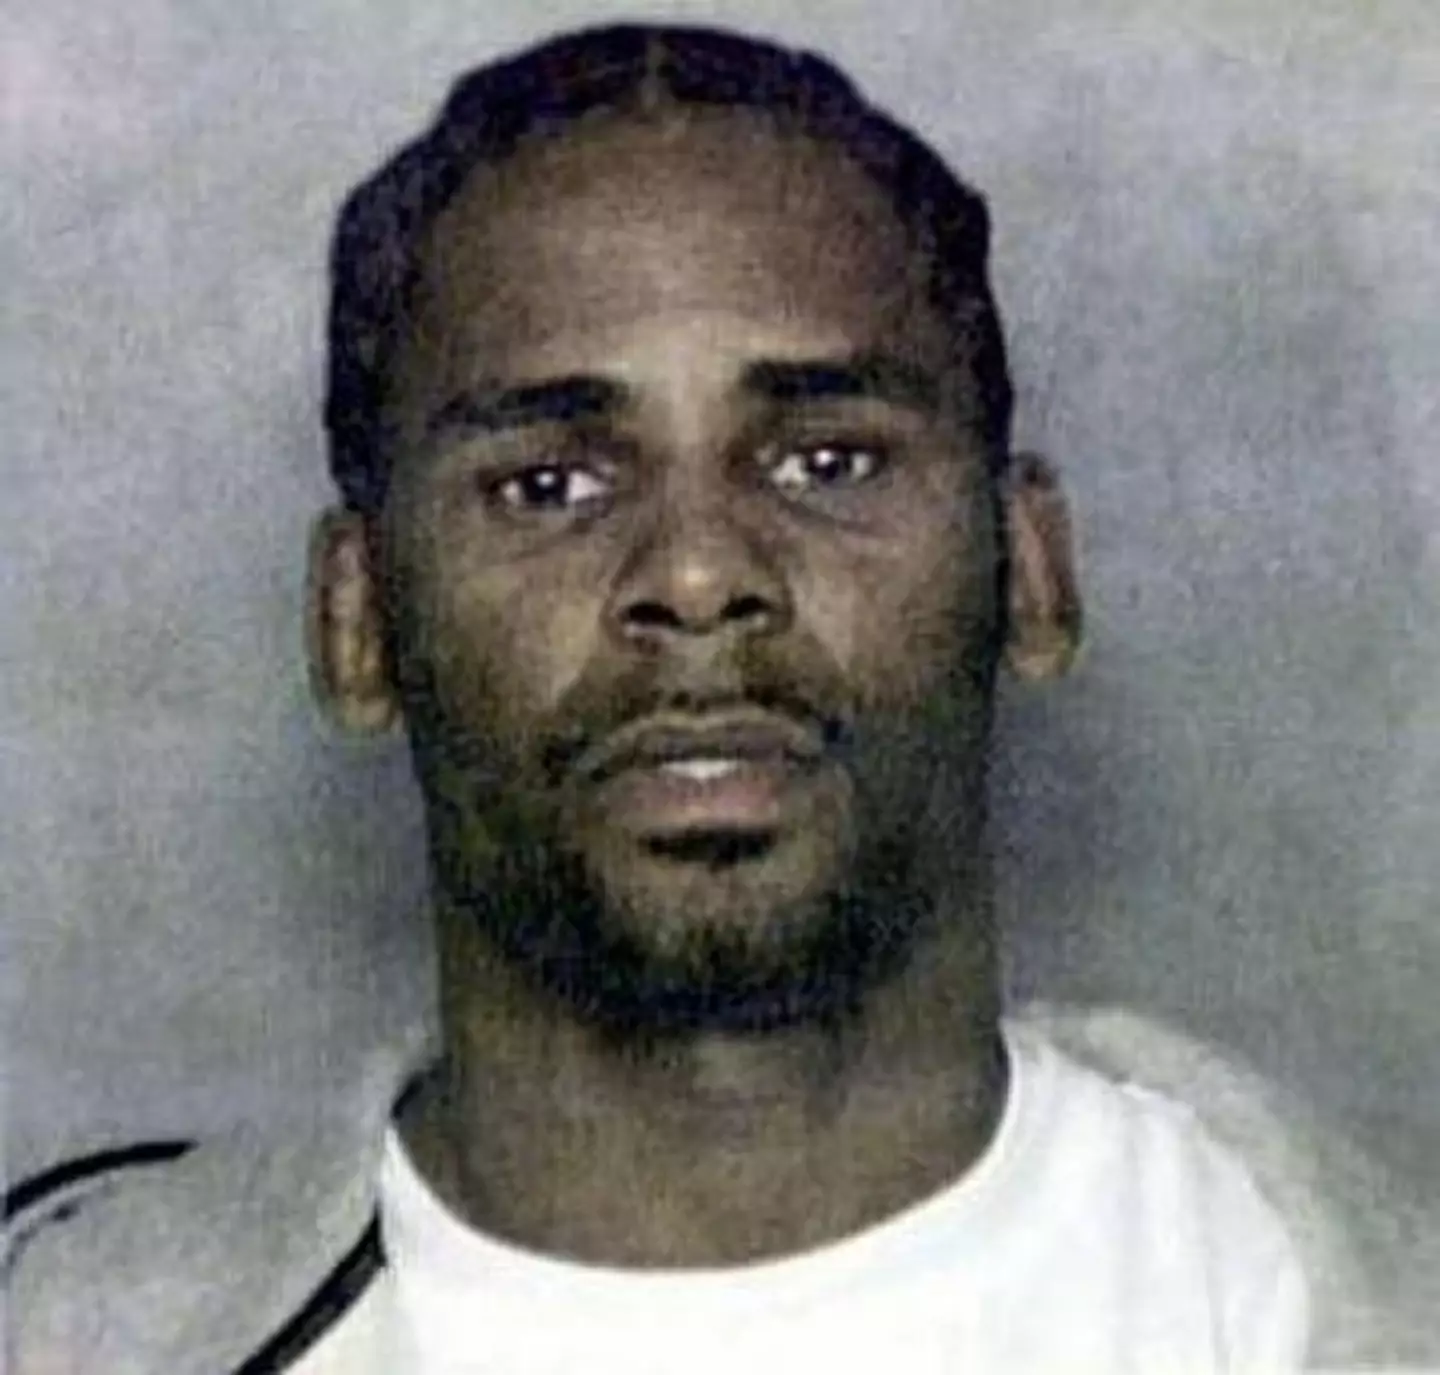 R Kelly was finally convicted of his crimes.